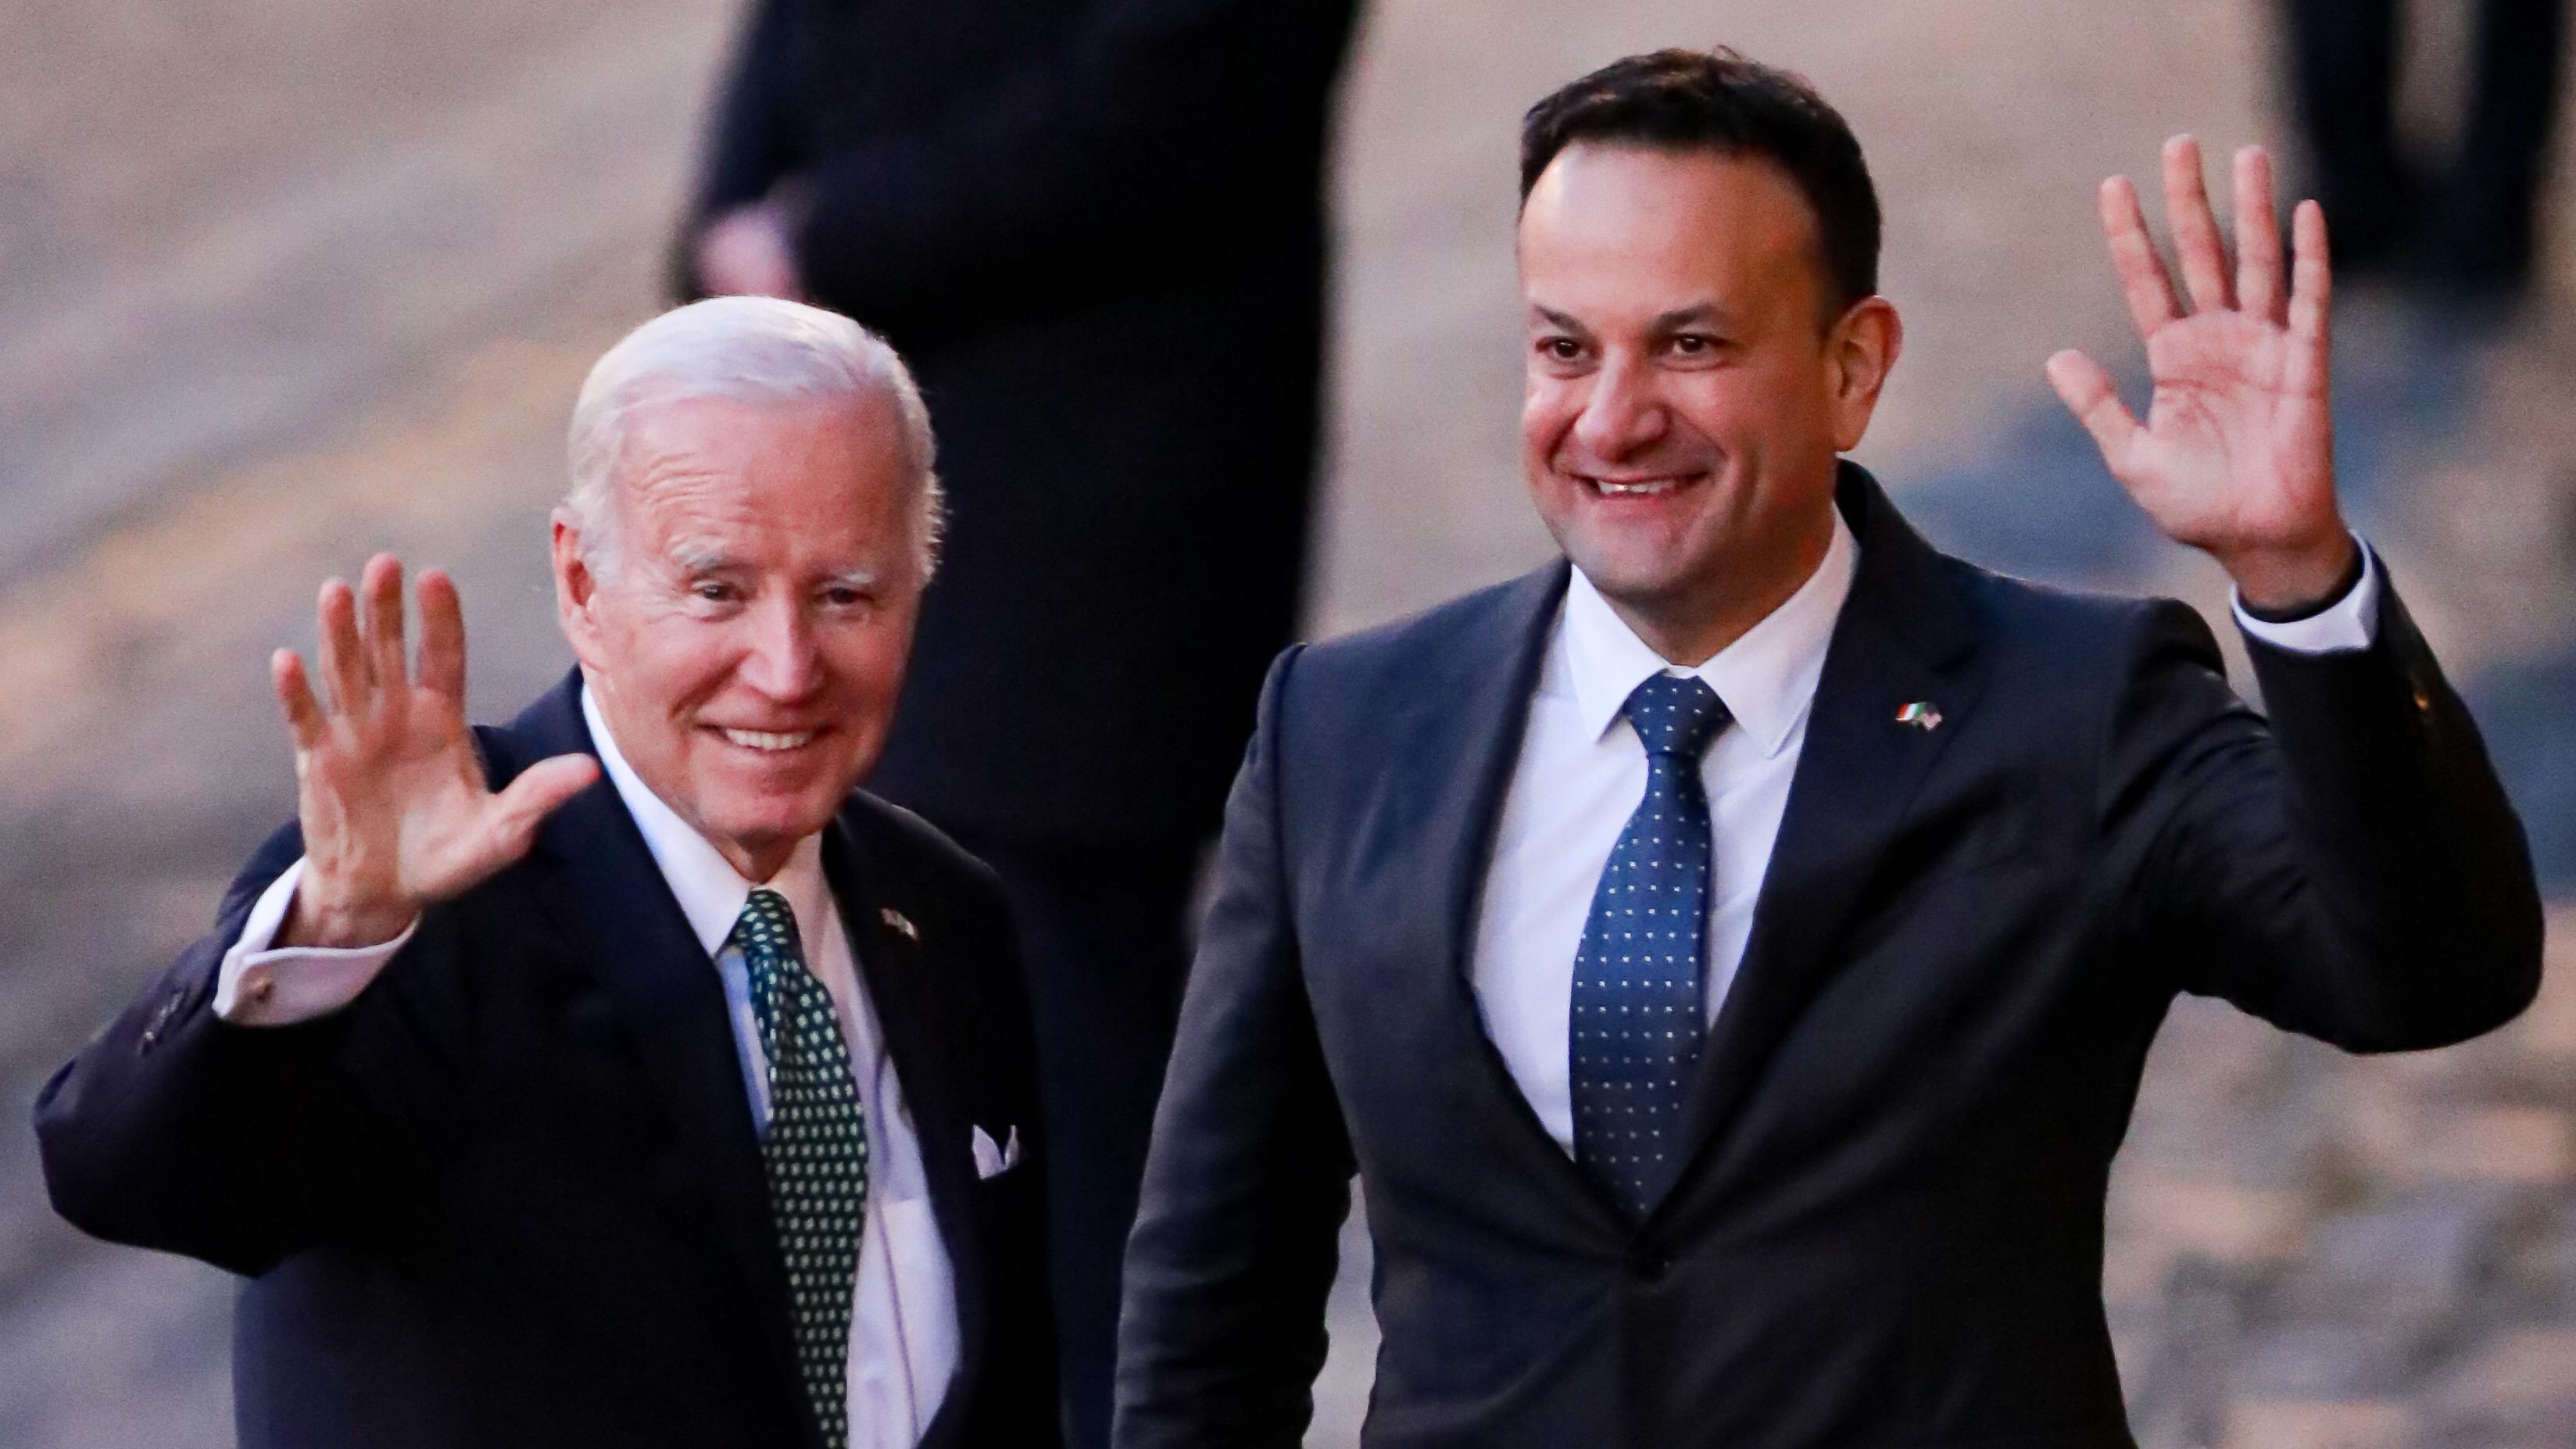 US President Joe Biden (left) is greeted by Taoiseach Leo Varadkar as he arrives for a state dinner at Dublin Castle during his visit to Ireland